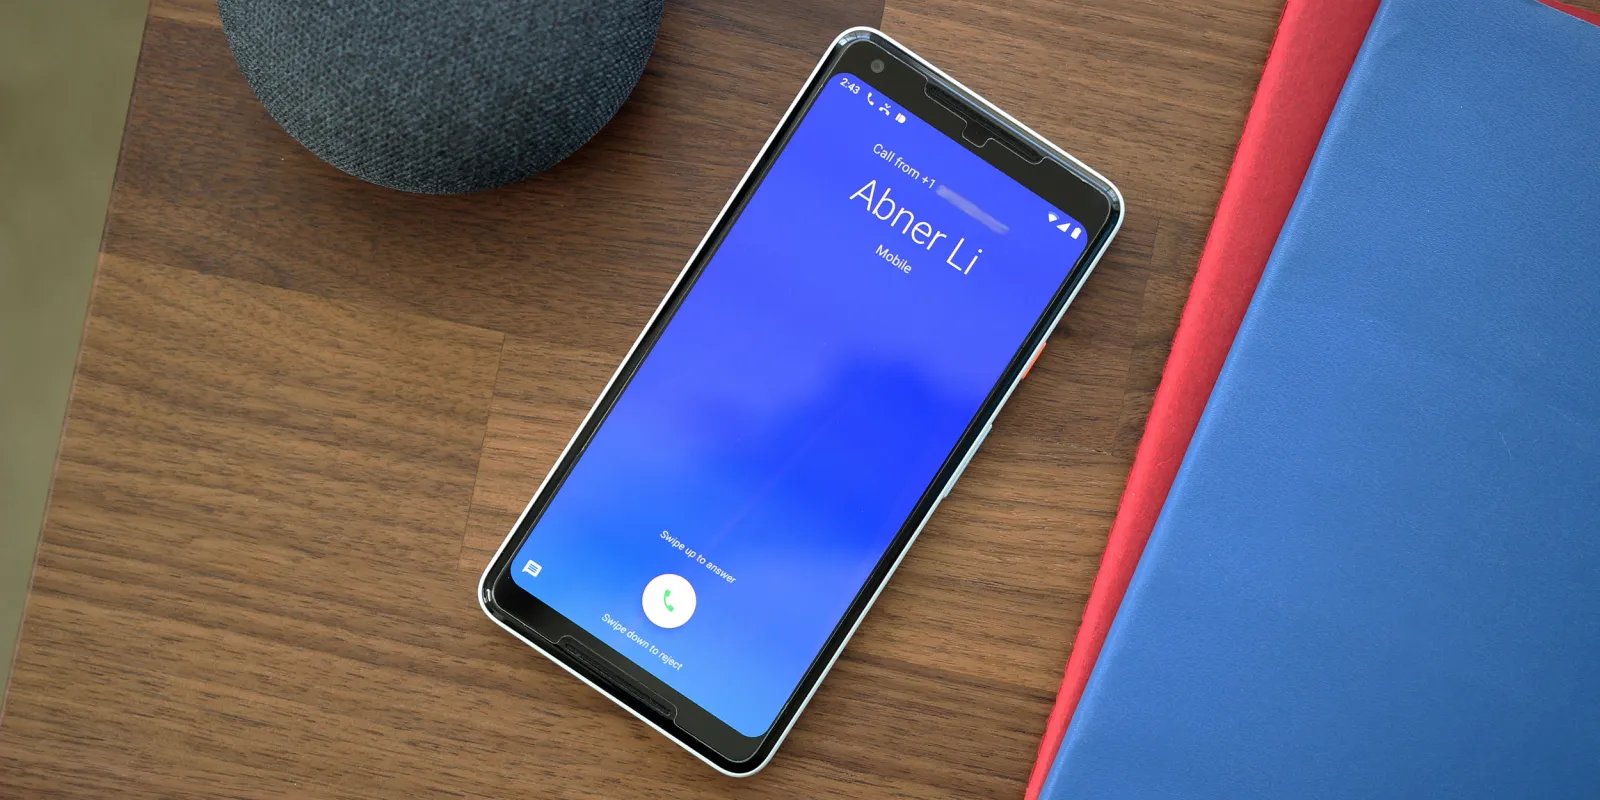 google-phone-app-gains-support-for-caller-id-announcement